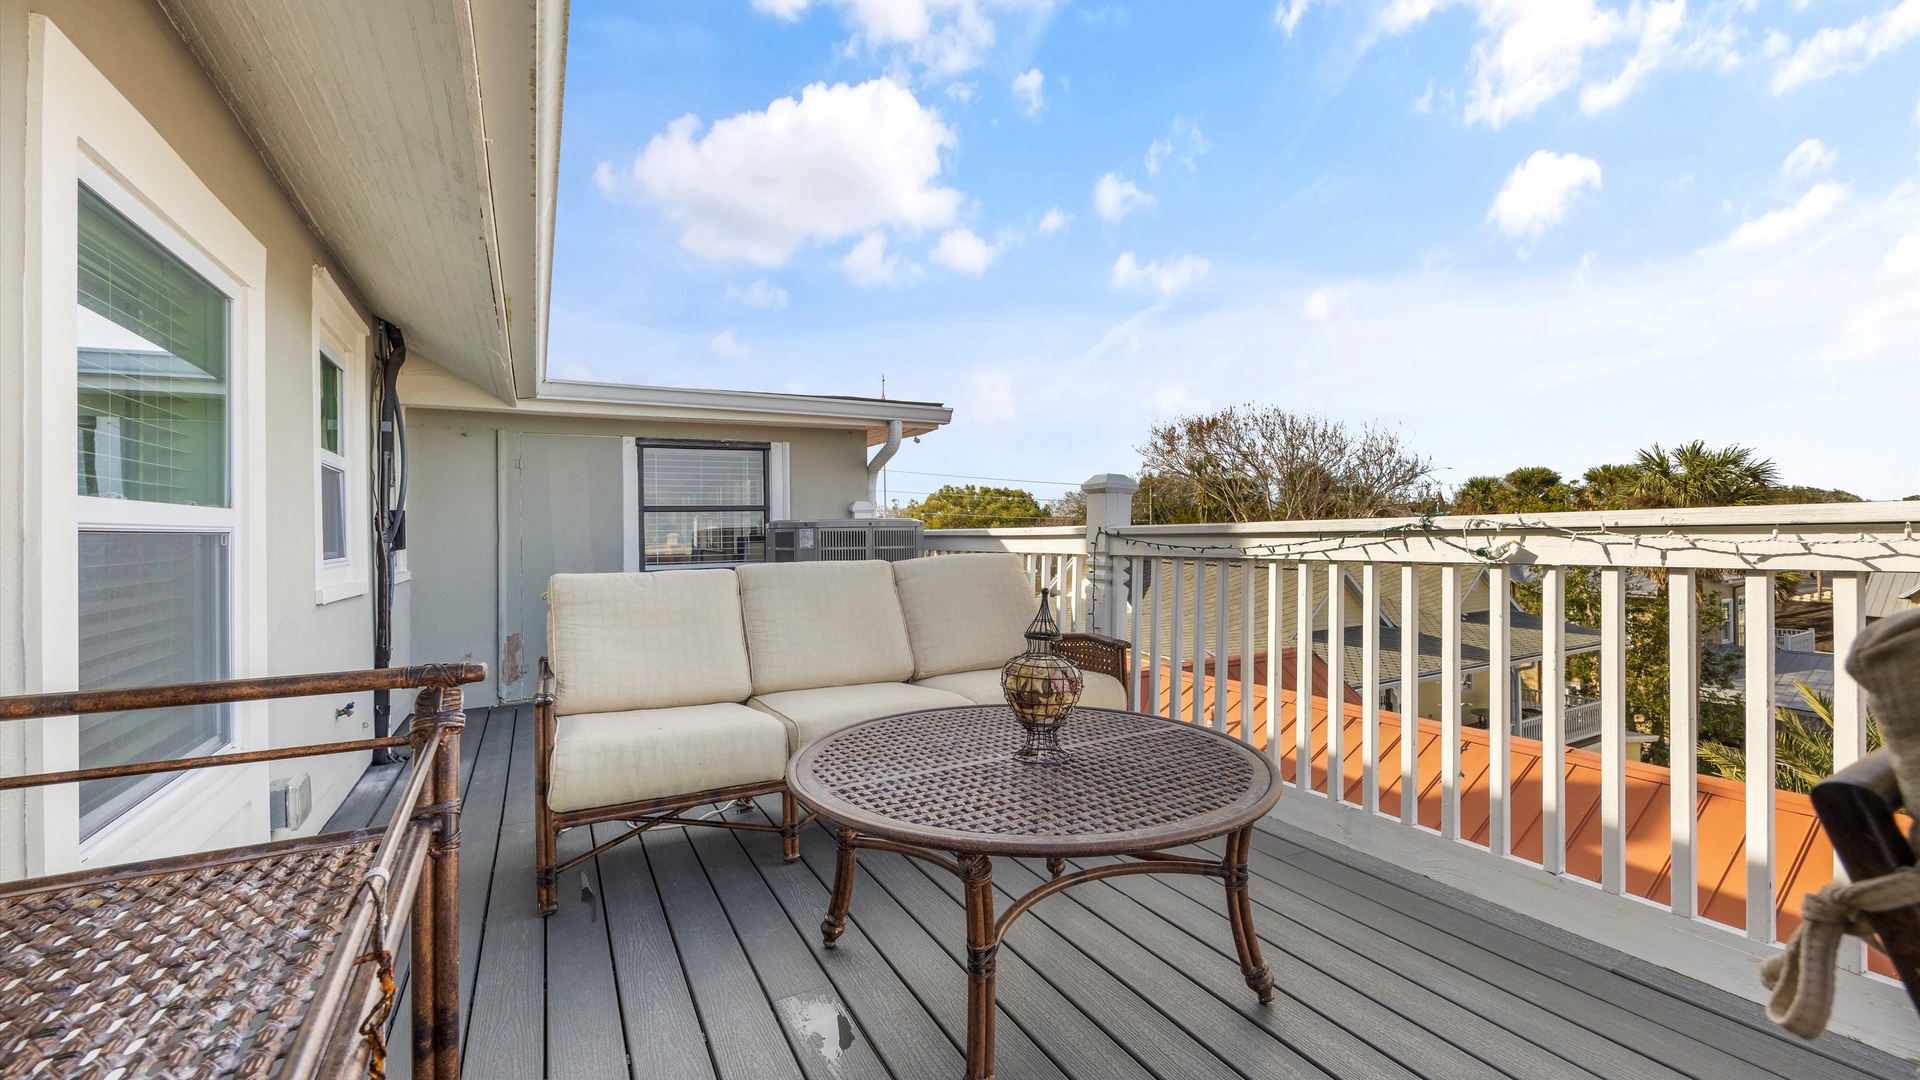 Enjoy meals alfresco or lounge with gorgeous water views on the deck